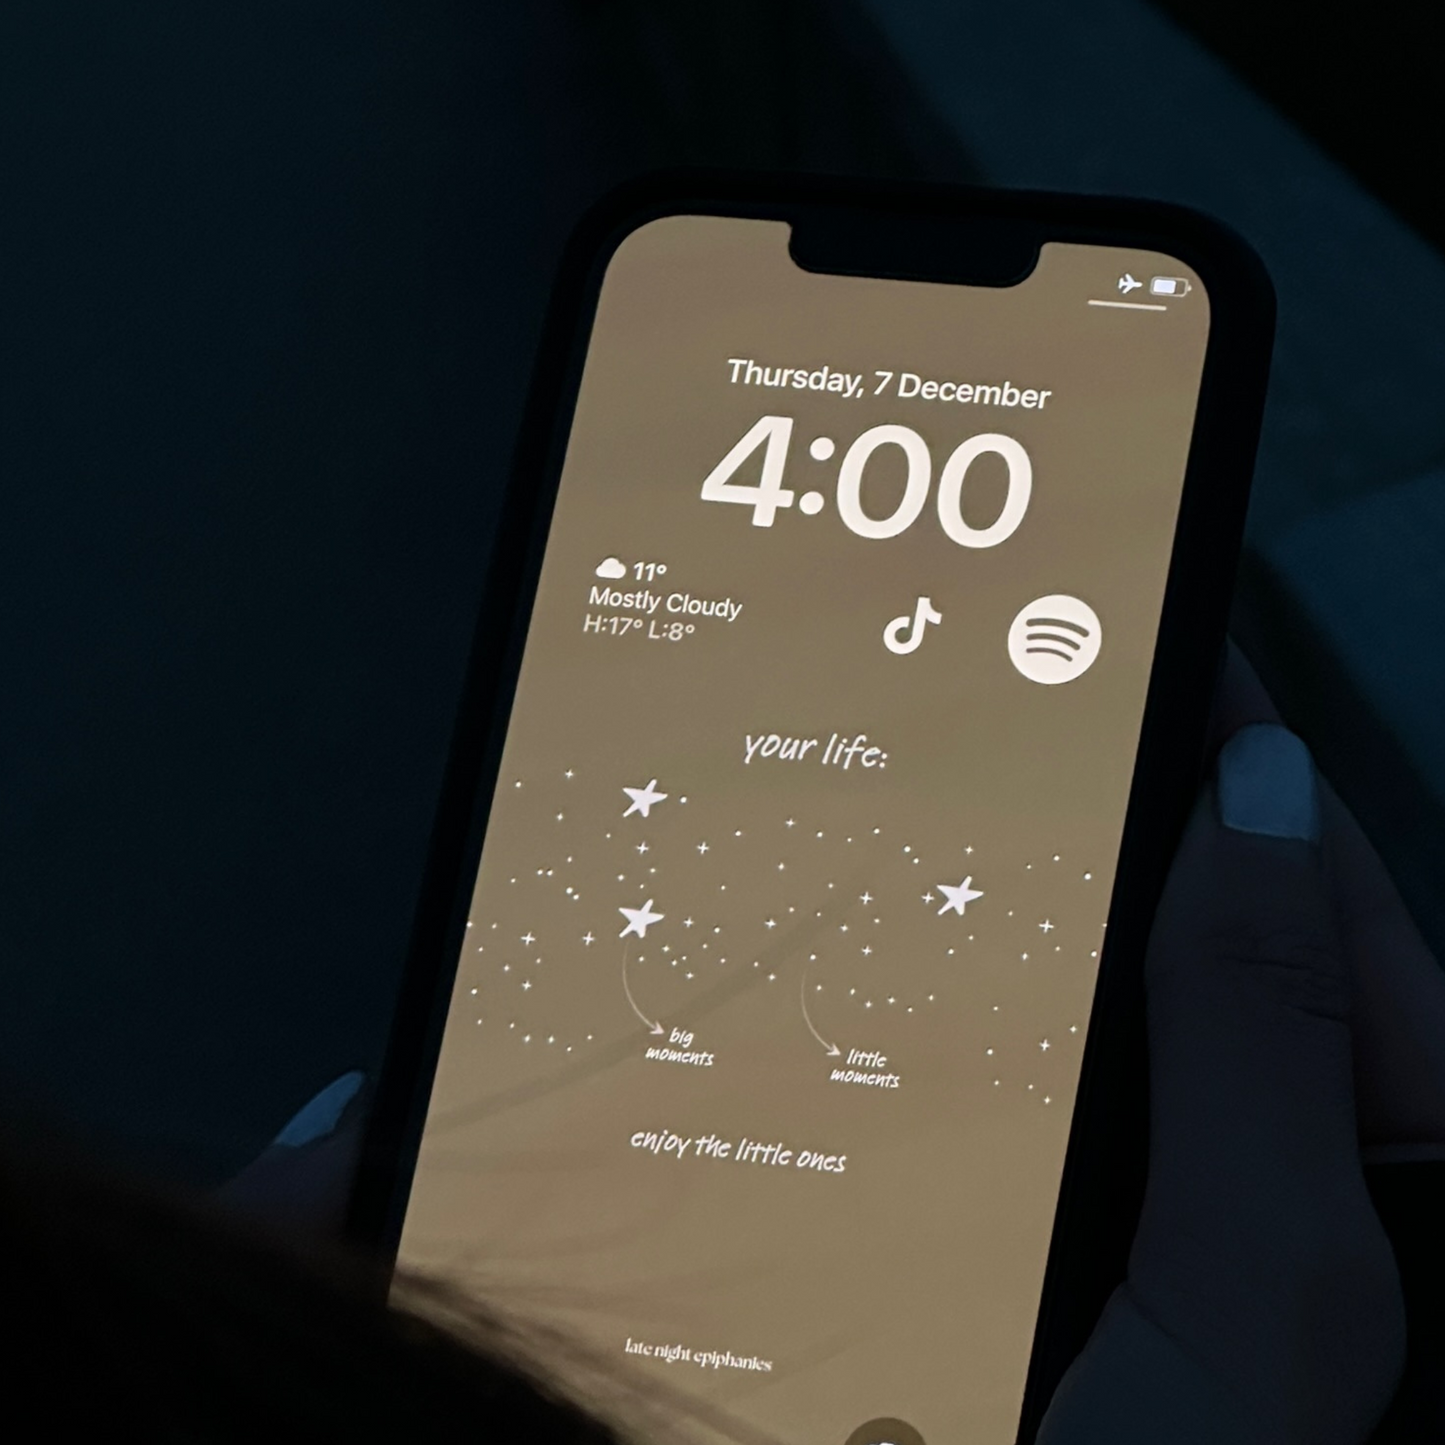 Image of an iPhone with a Late Night Epiphanies wallpaper that says "your life:" and is followed by an illustration of a sky full of stars, with a bunch of little starts and 4 bigger stars. 2 arrows point to the stars, one points to the big star and says "big moments" and another points to a big star and says "big moments." At the bottom it says "enjoy the little ones". 